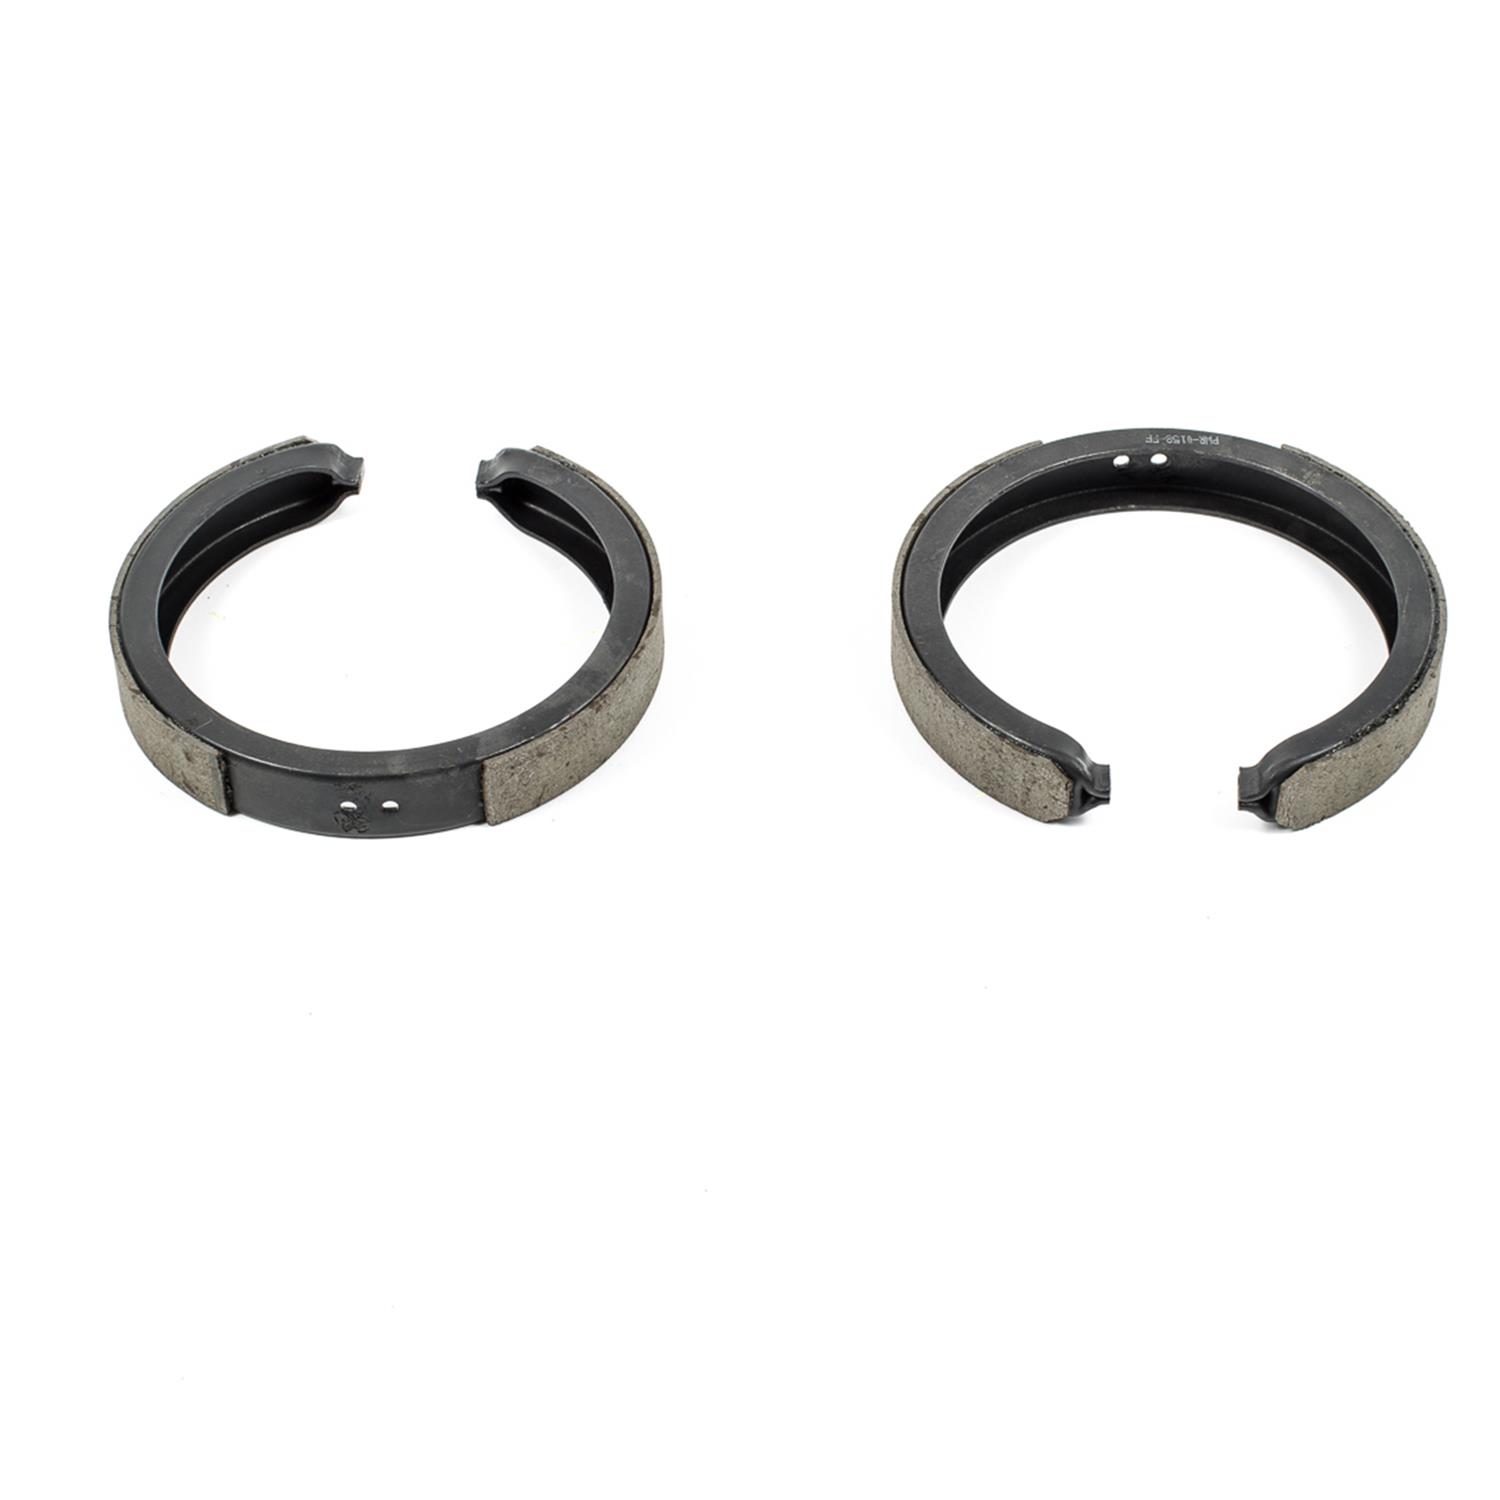 Power Stop B781 Power Stop Autospecialty Stock Replacement Brake Shoes